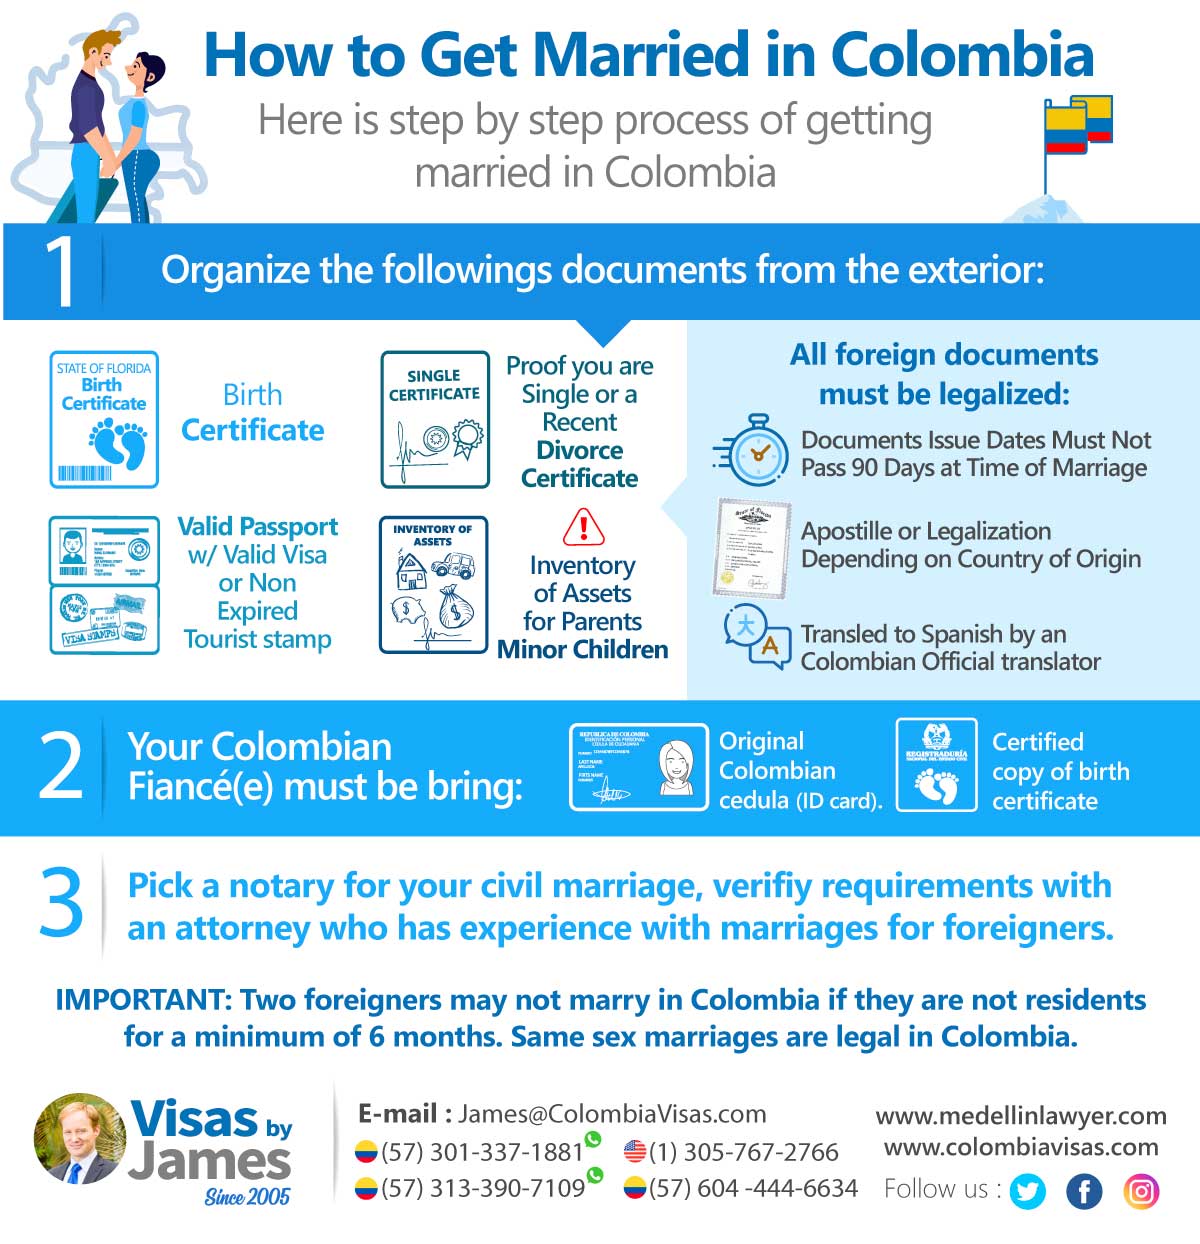 How-to-Get-Married-in-Colombia